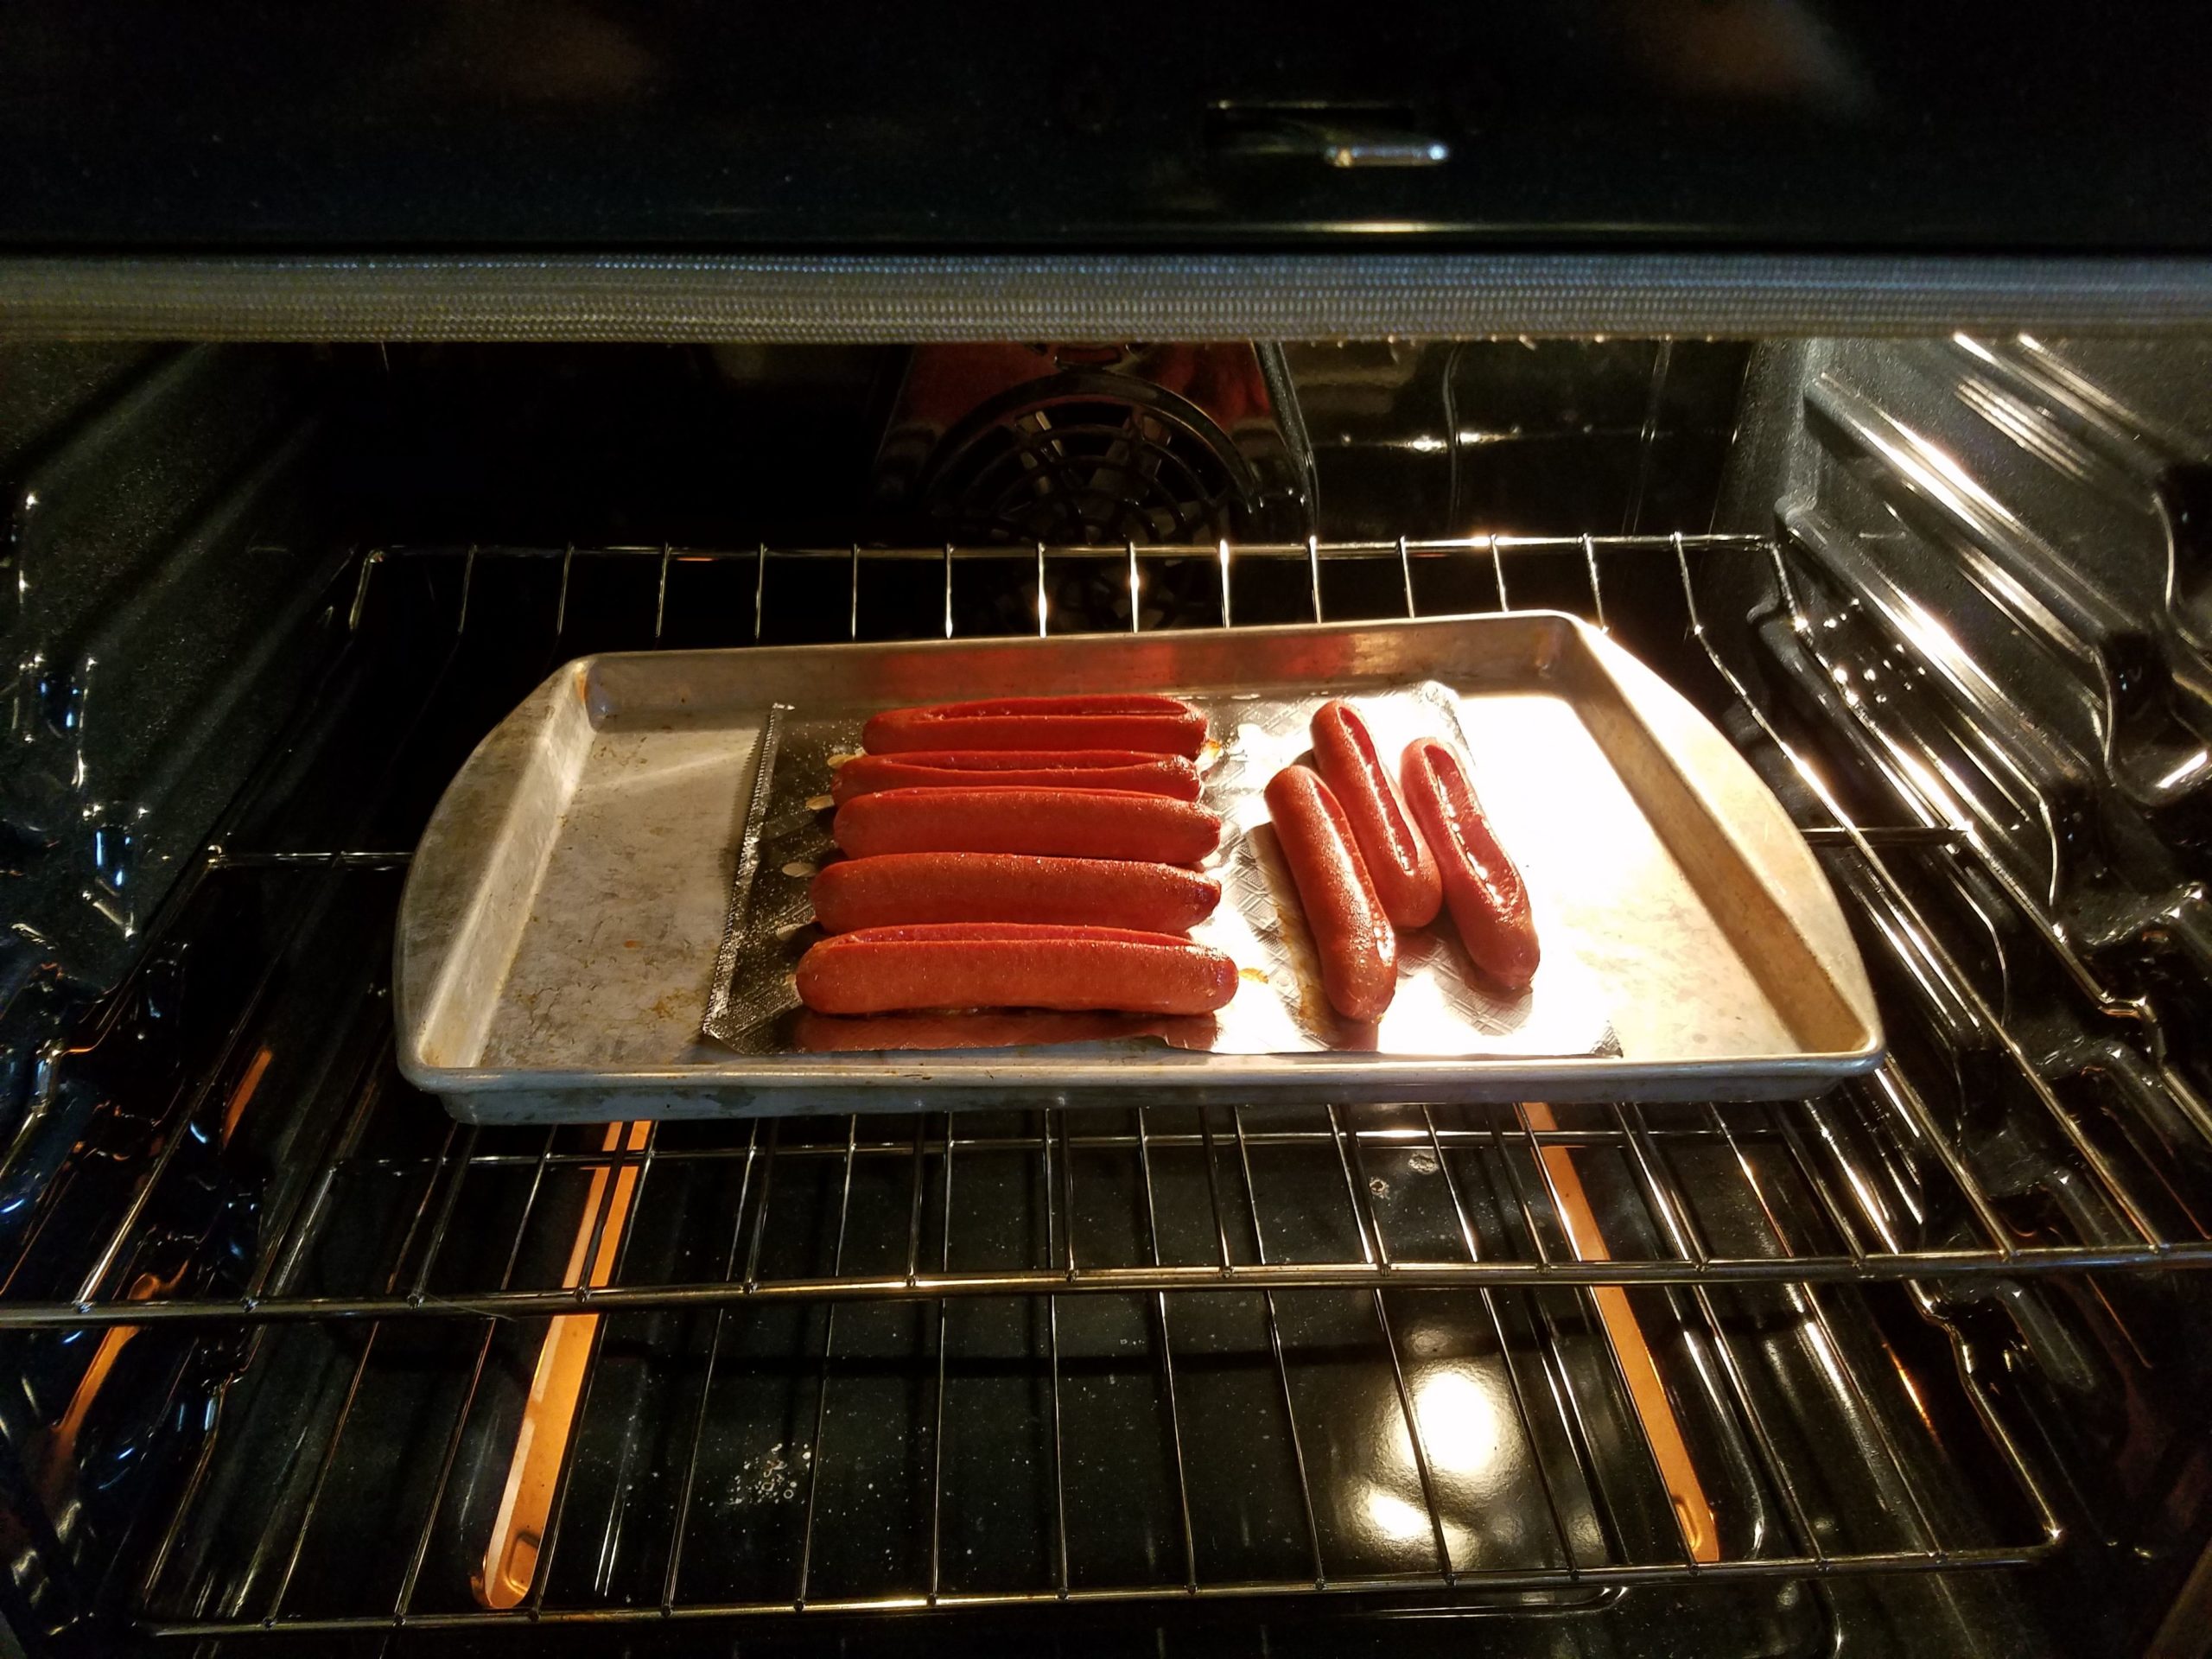 How To Cook Hot Dogs In Toaster Oven